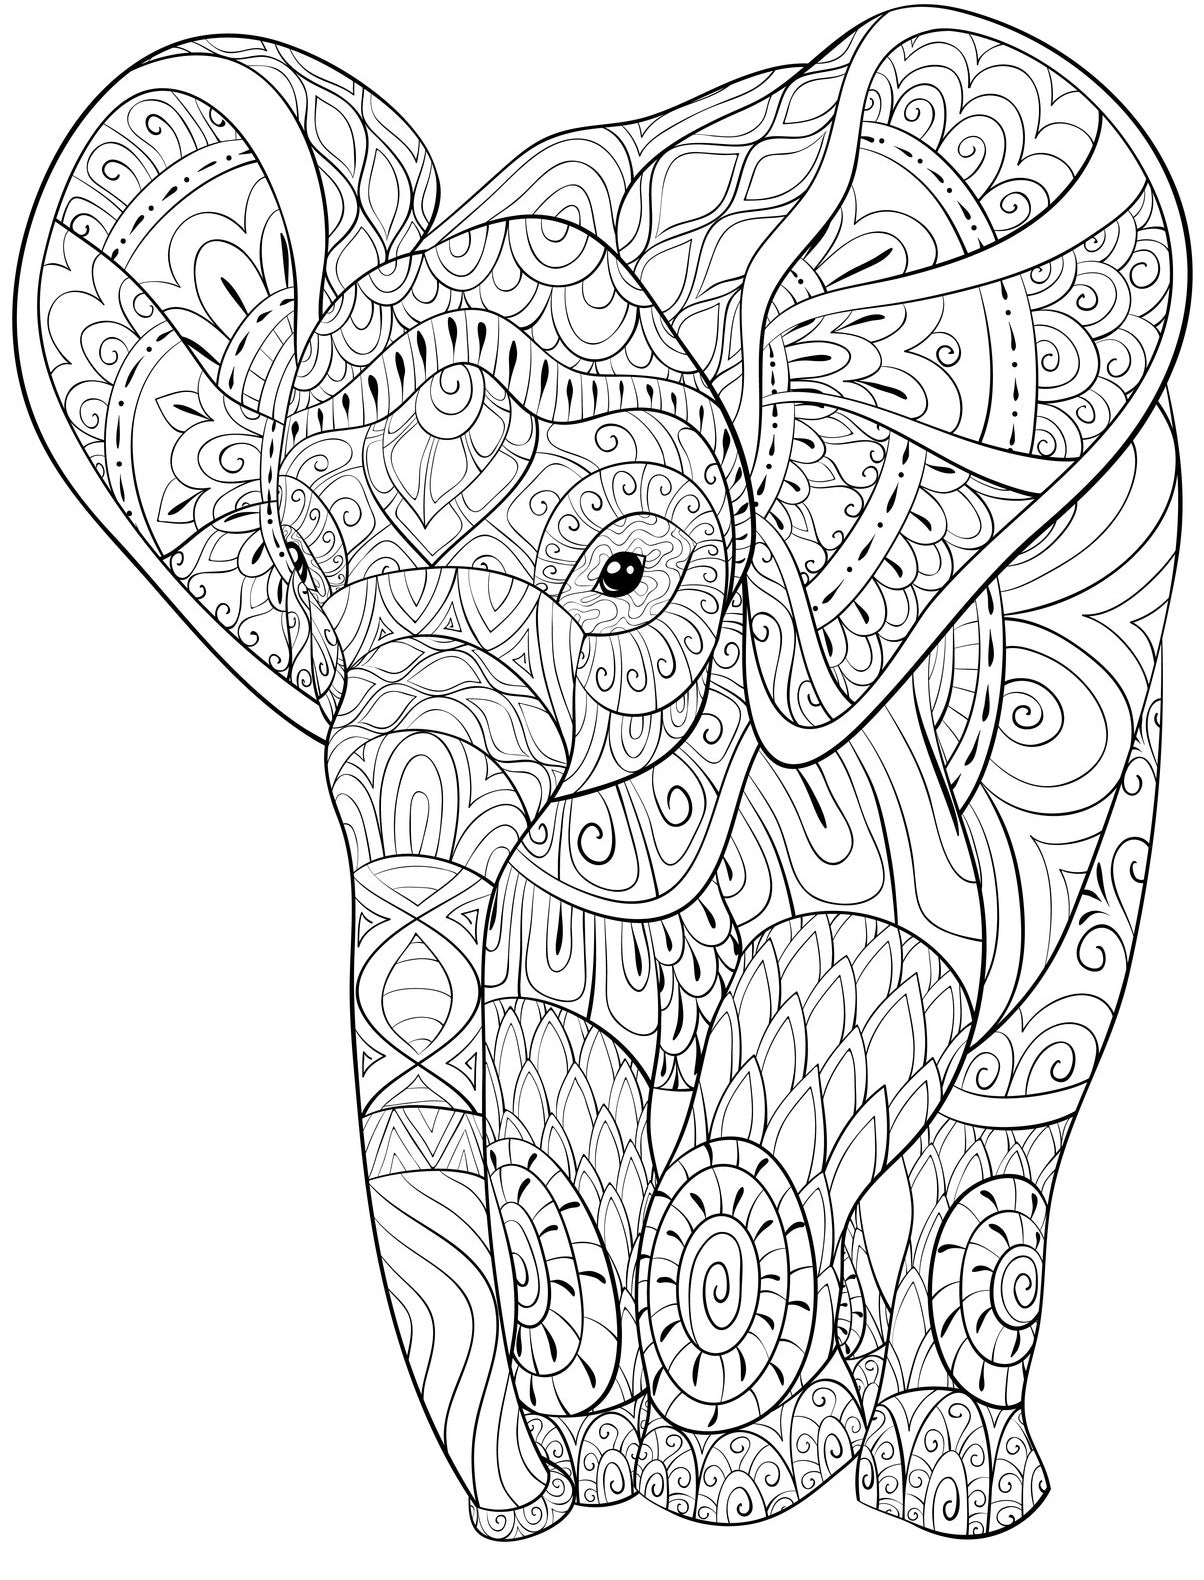 Elephants, PDF Coloring Book - The Largest African Animals in Relaxing –  Rachel Mintz Coloring Books